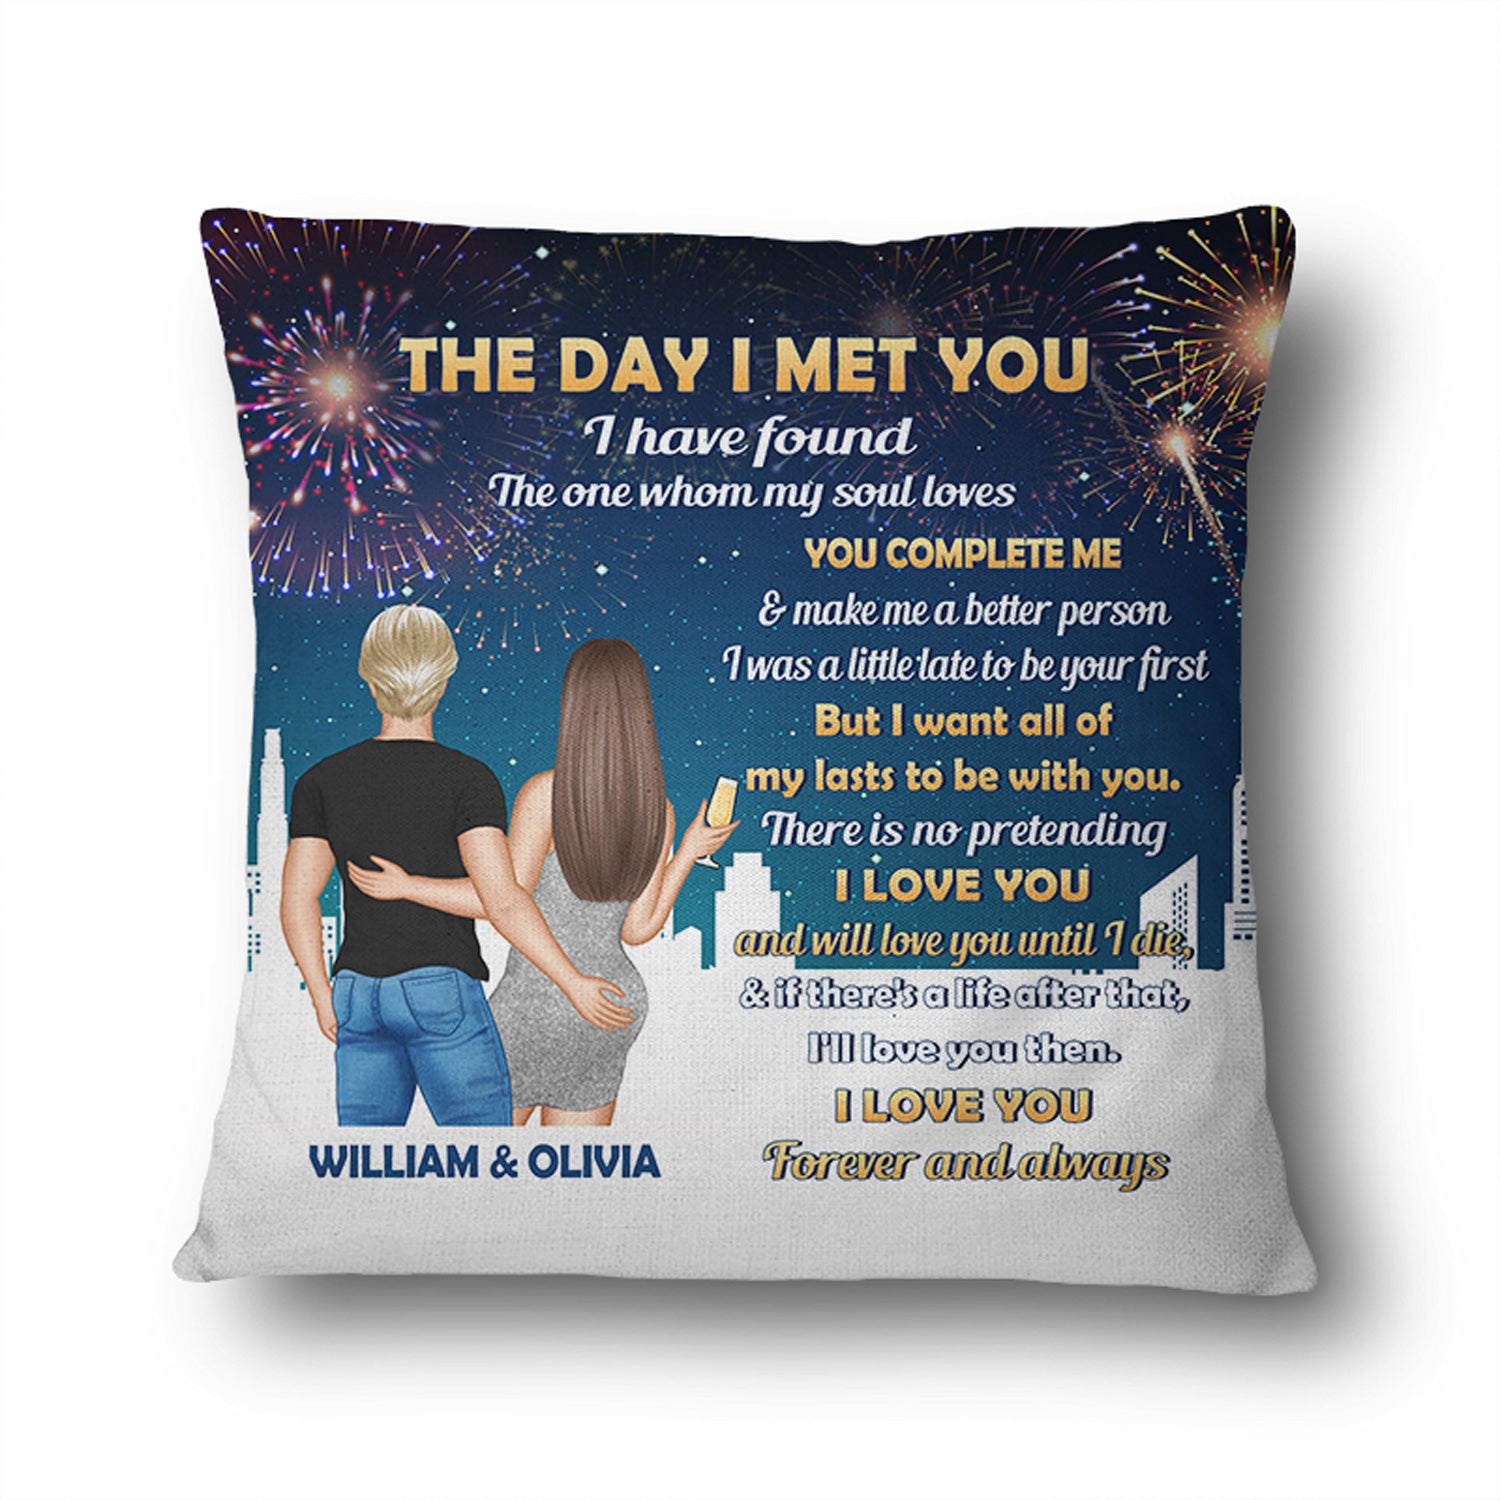 I Have Found The One - Gift For Couples - Personalized Custom Pillow